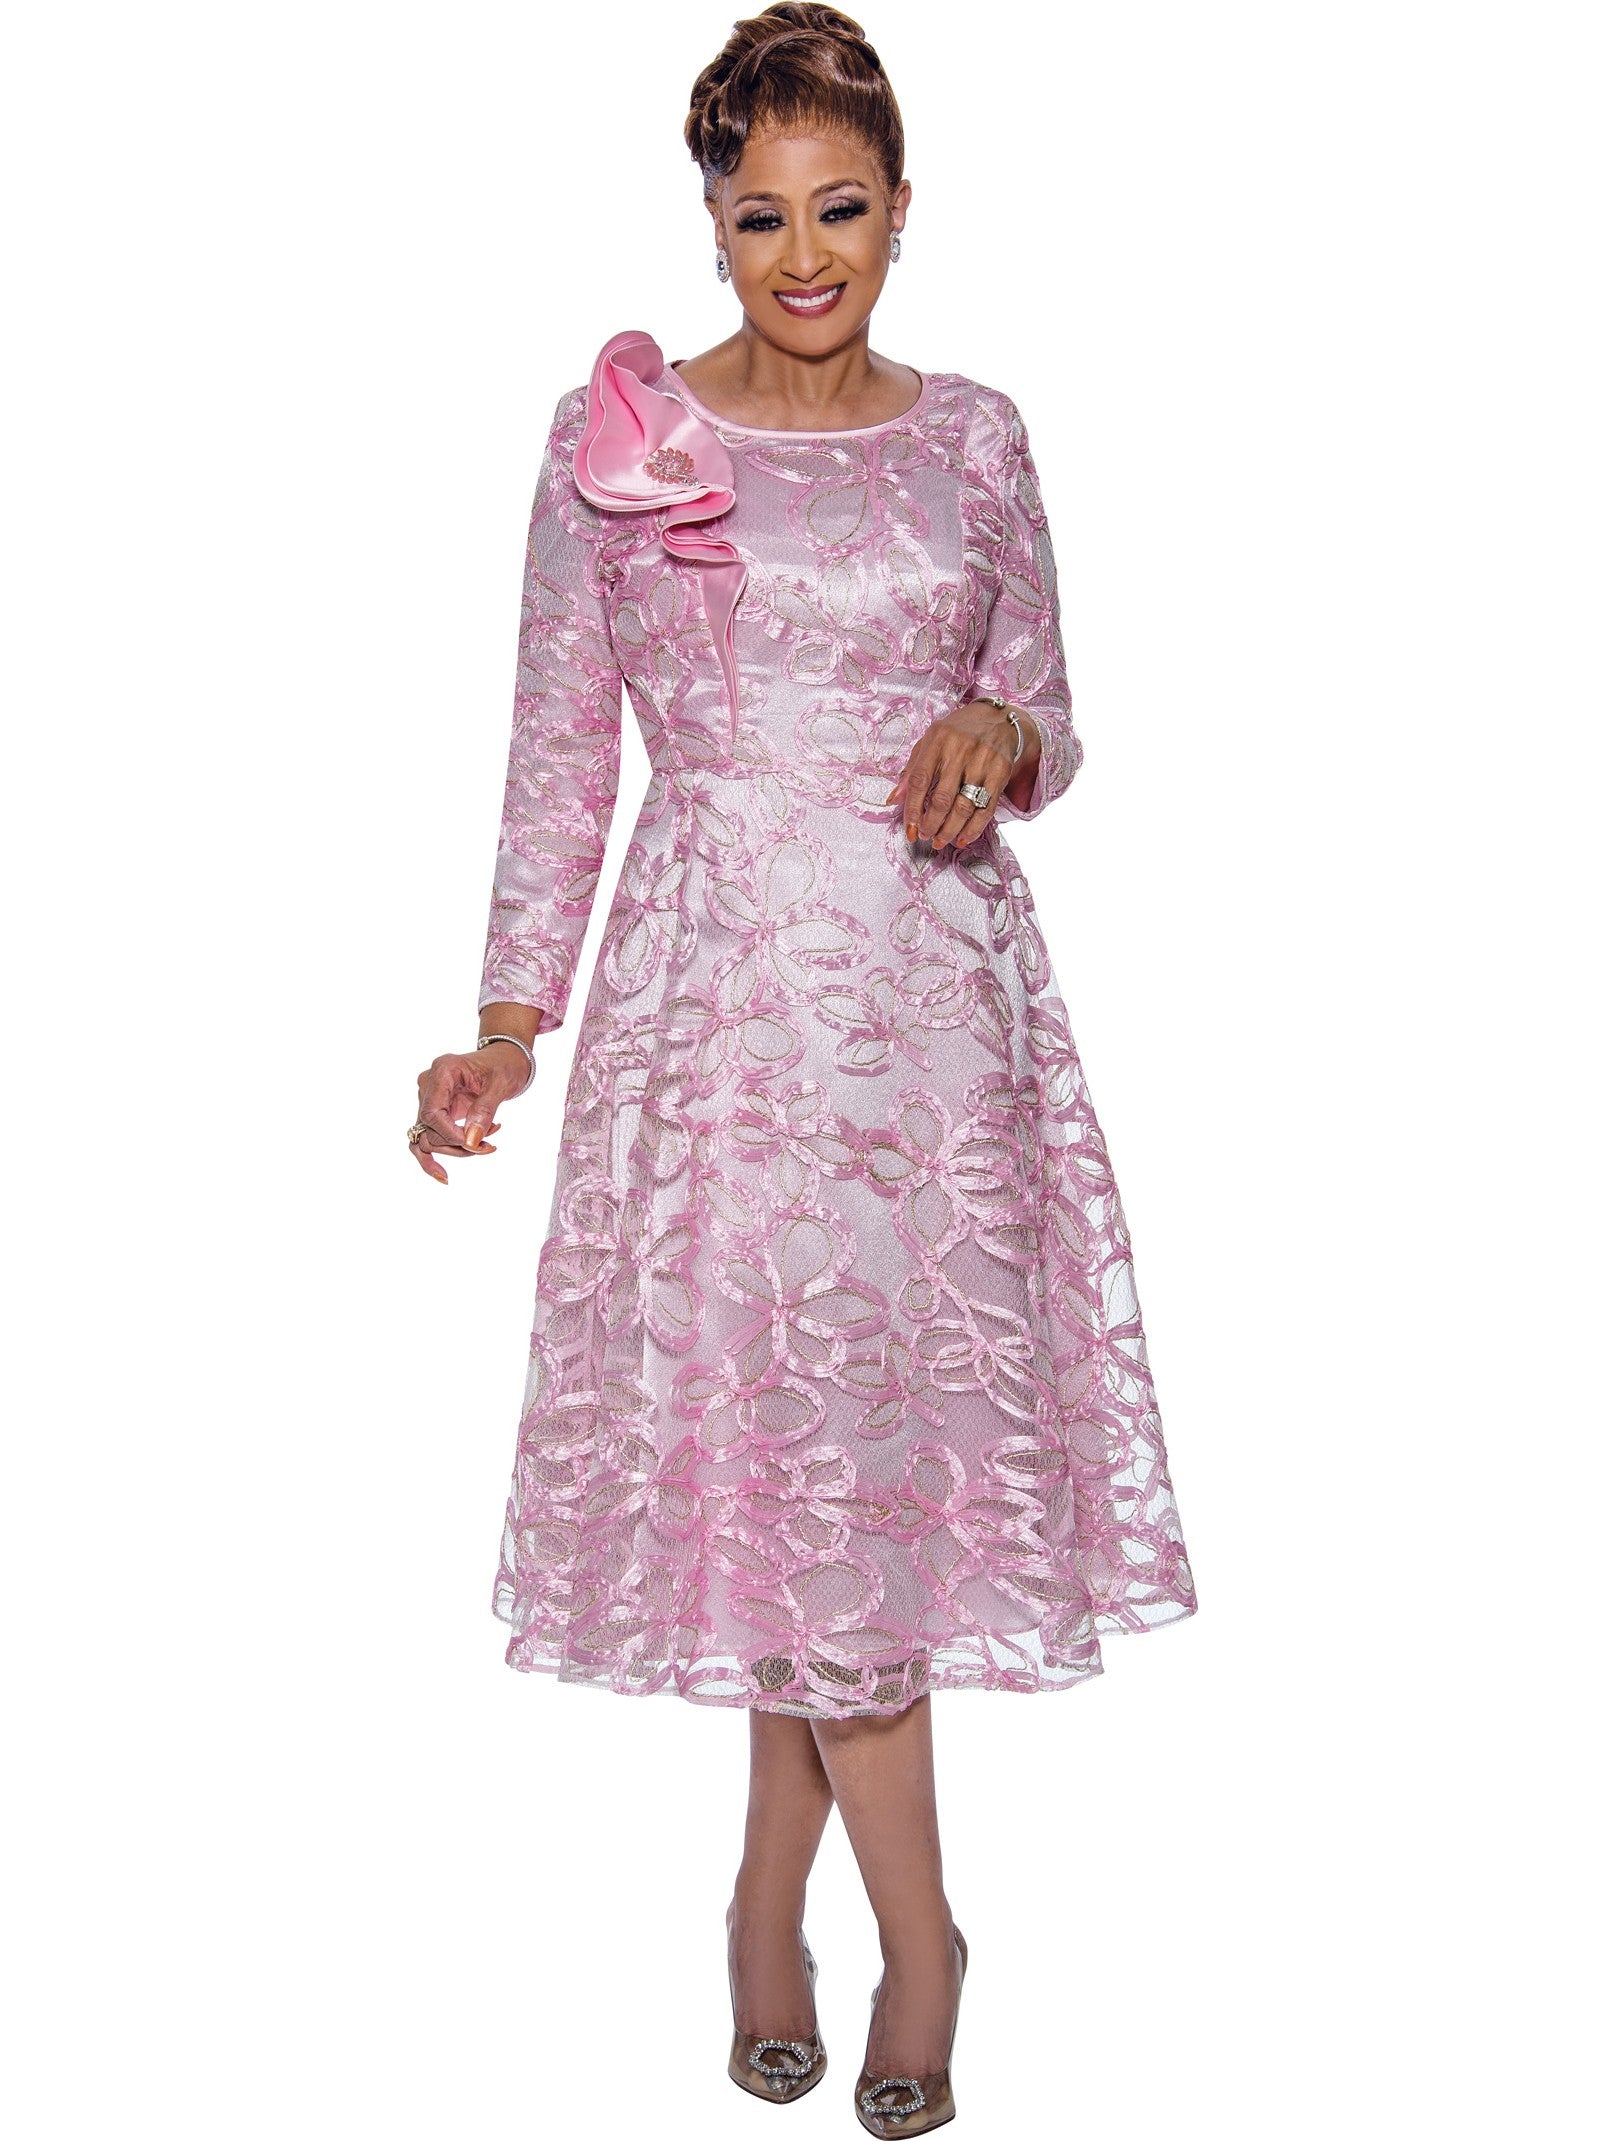 Plus Size Dresses Plus Size Mother of the Bride Ruffle Brooch Dress Pink